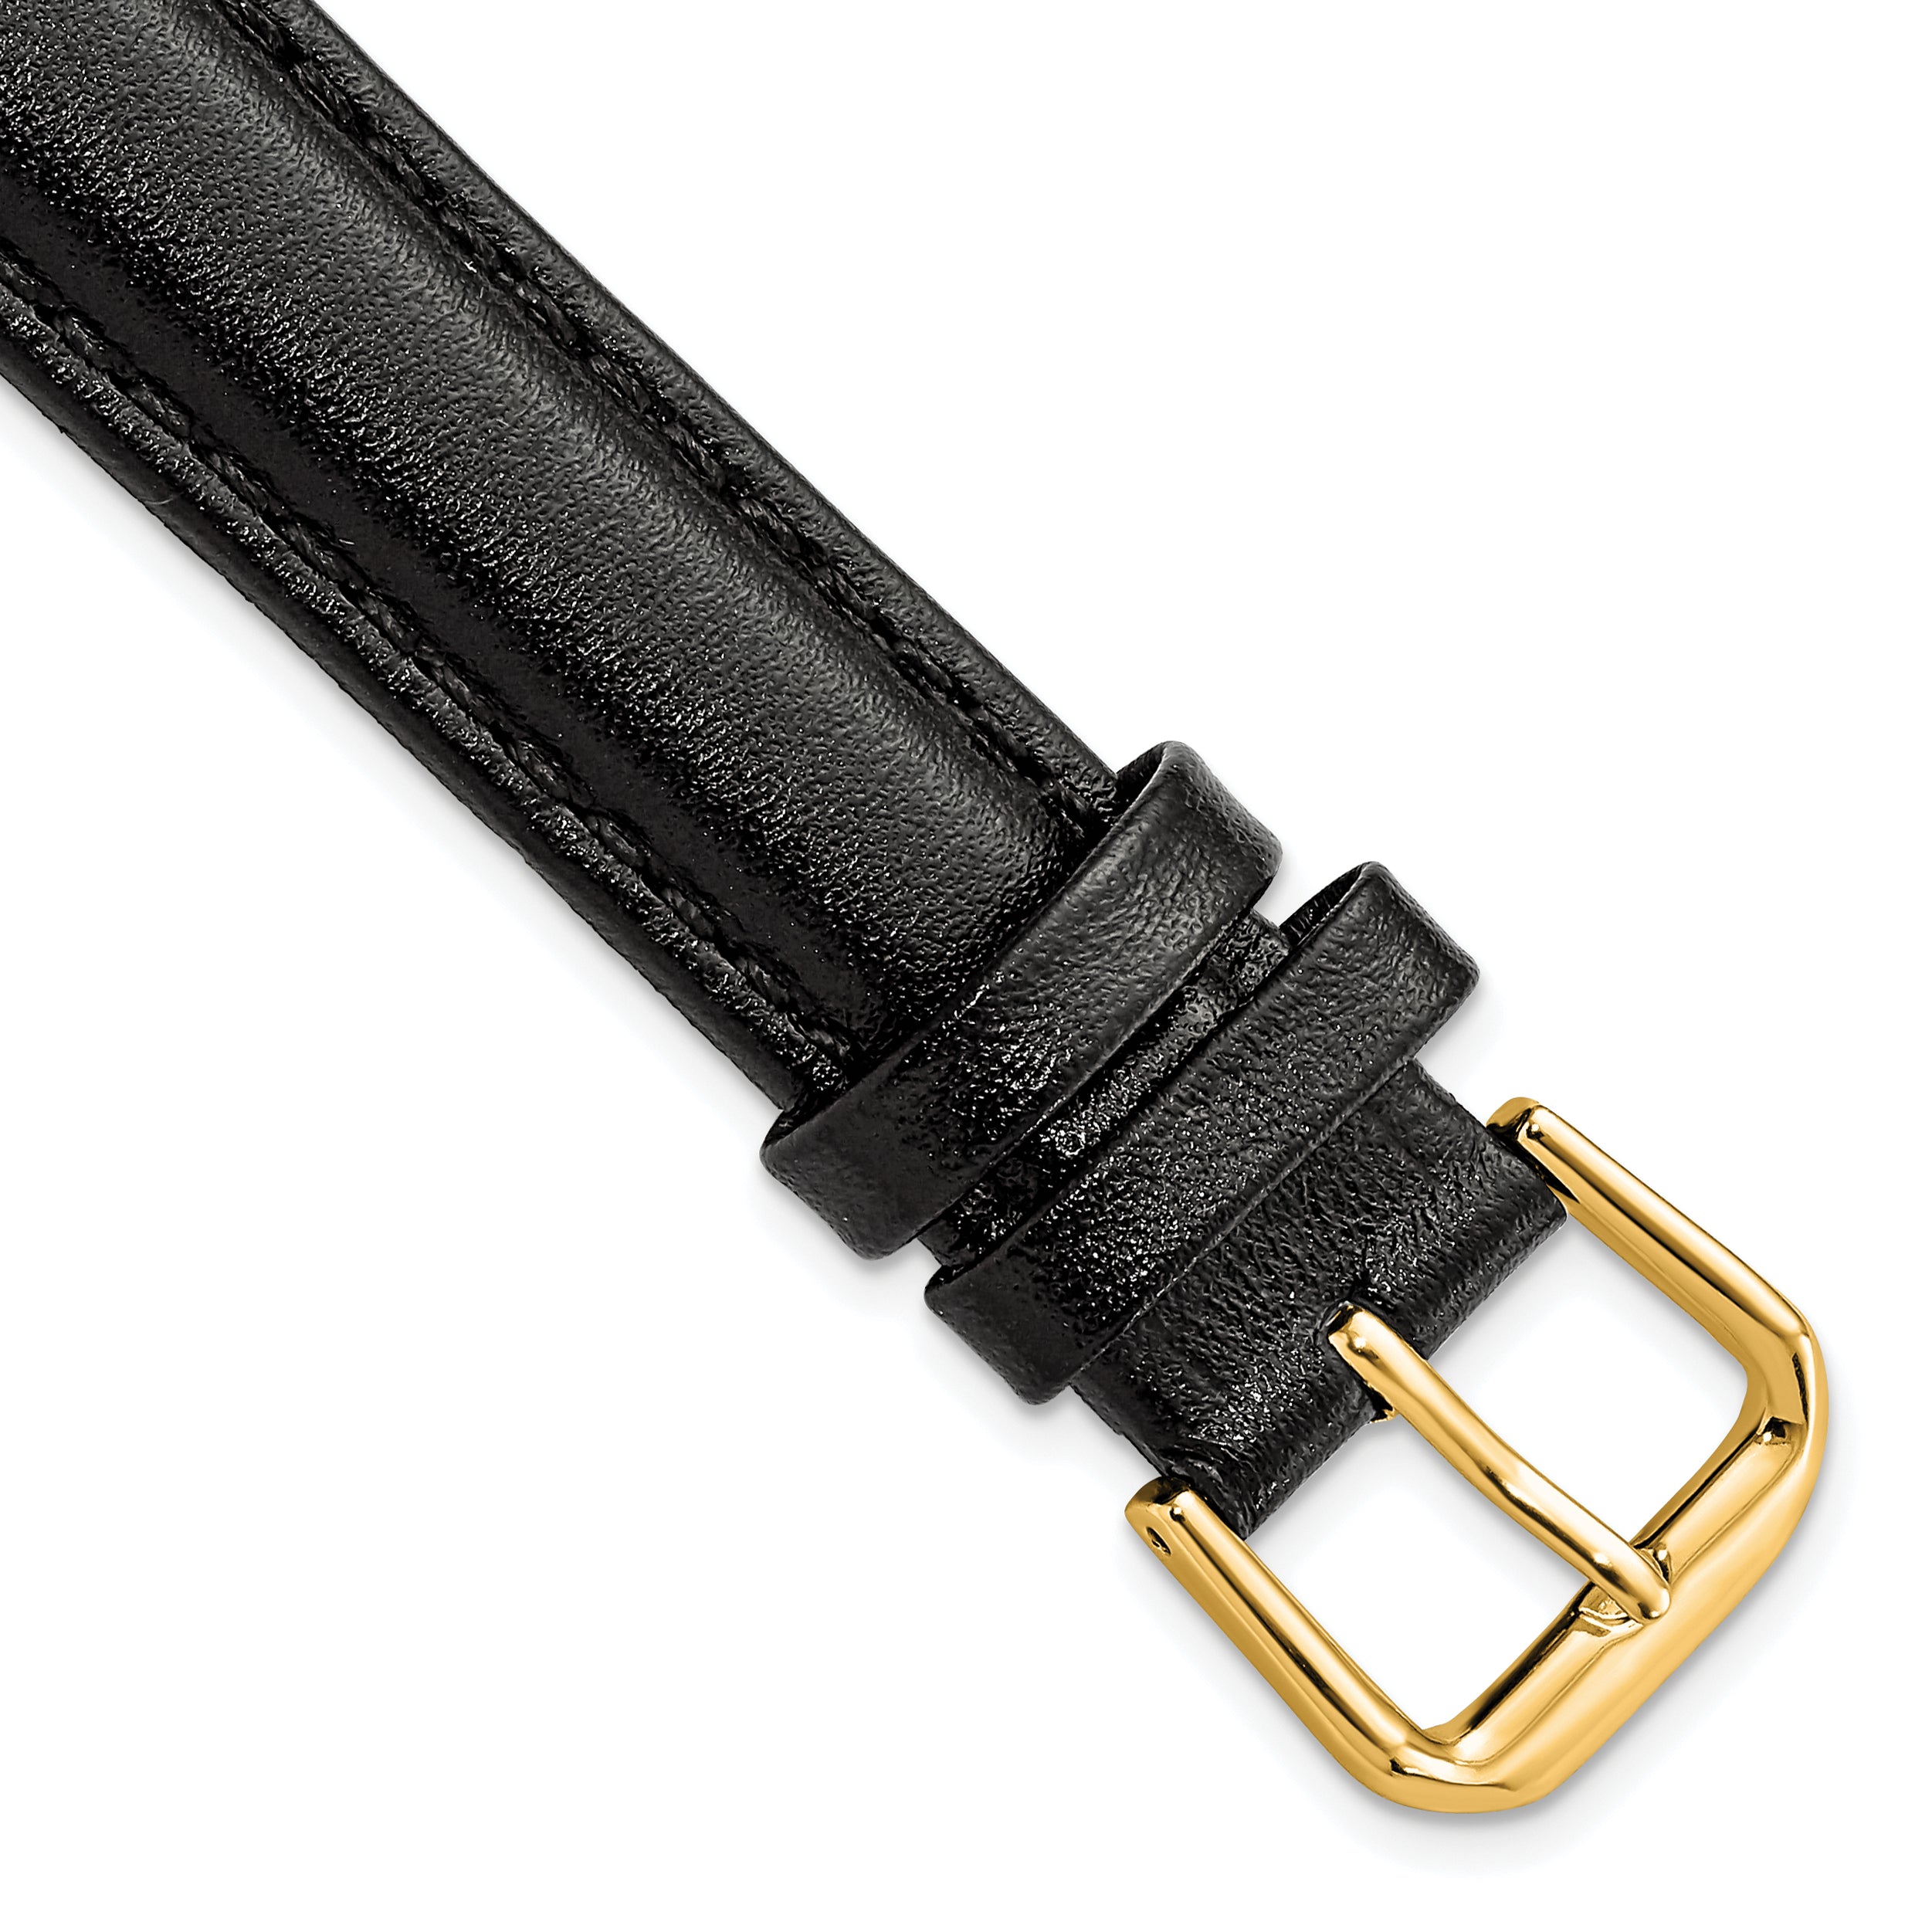 DeBeer 16mm Black Long Smooth Leather with Gold-tone Buckle 8.5 inch Watch Band